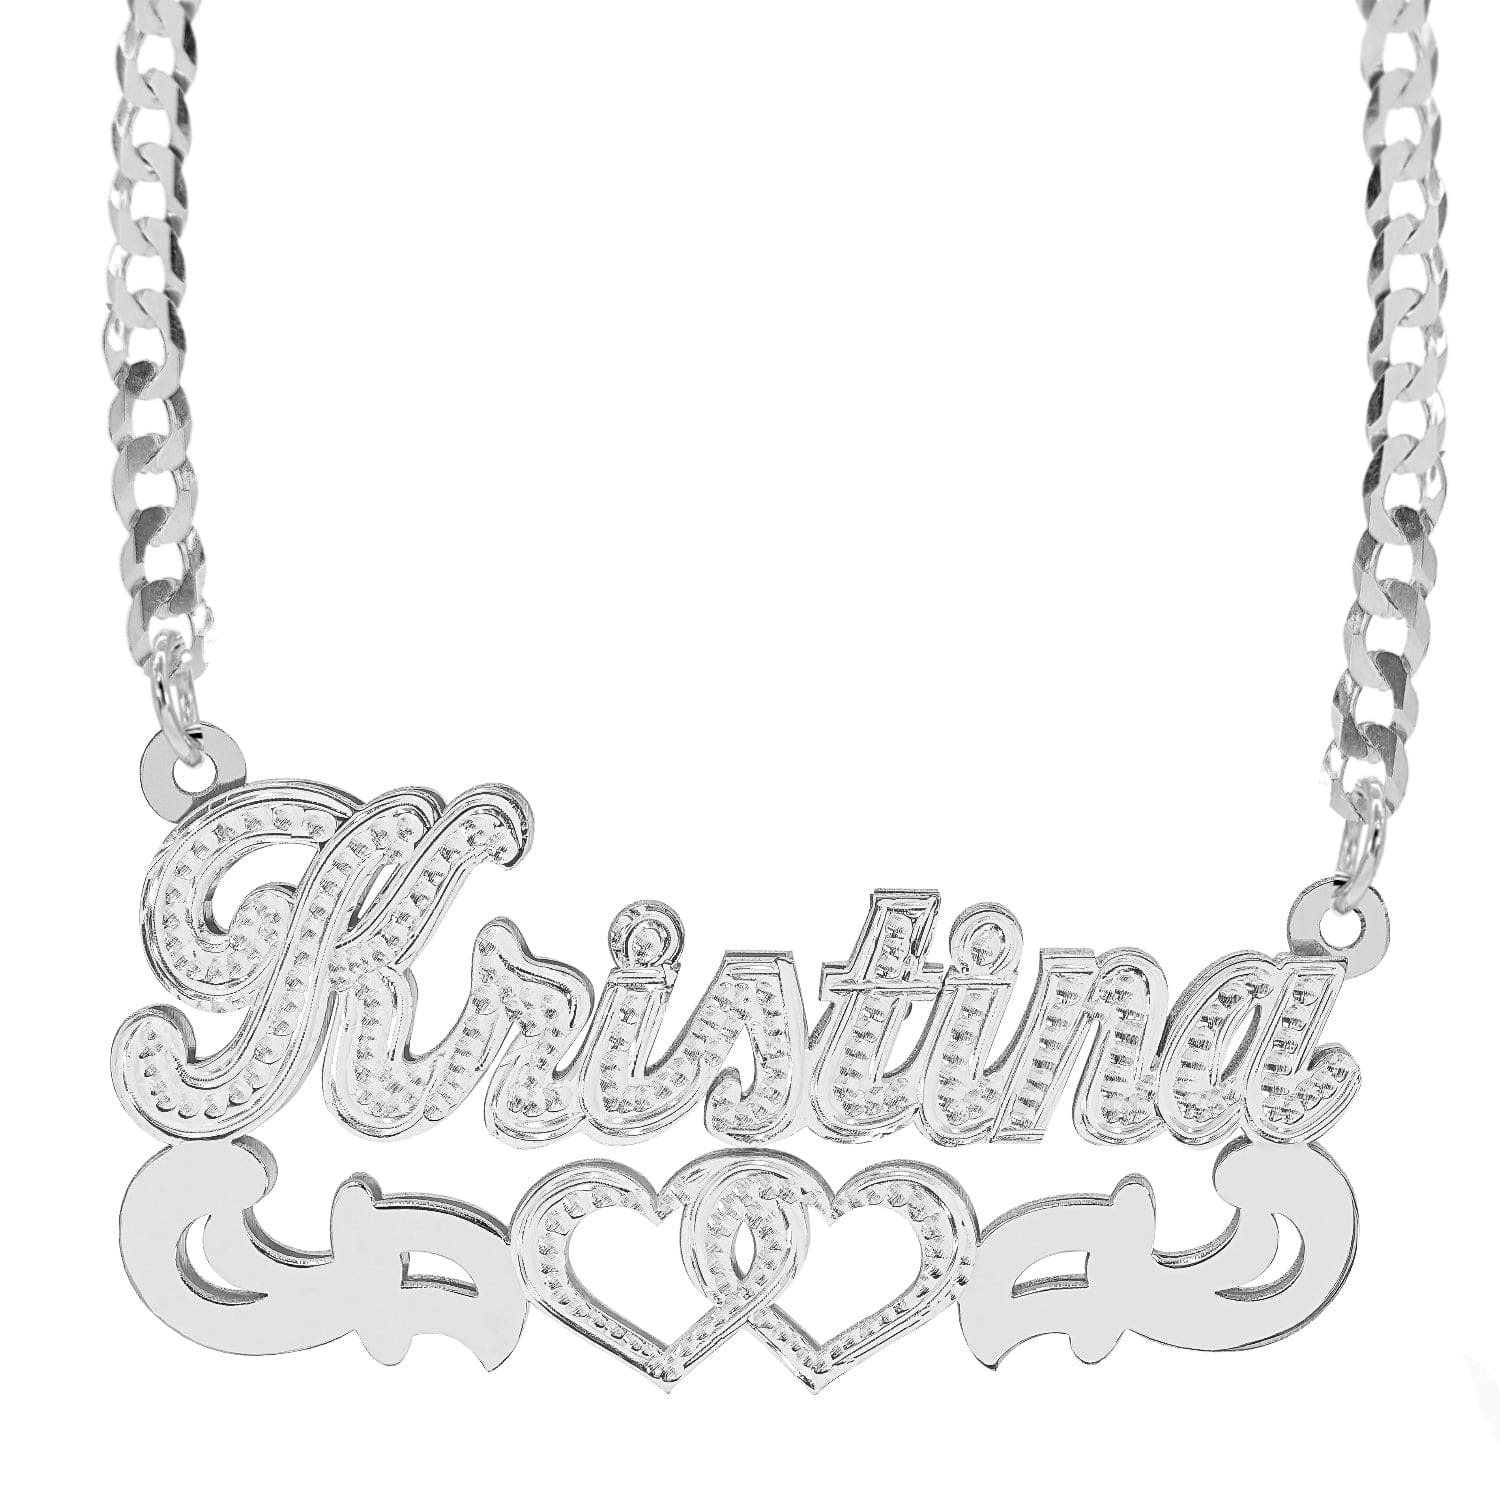 Two-Tone. Sterling Silver / Cuban Chain Double Nameplate Necklace "Kristina" with Cuban chain